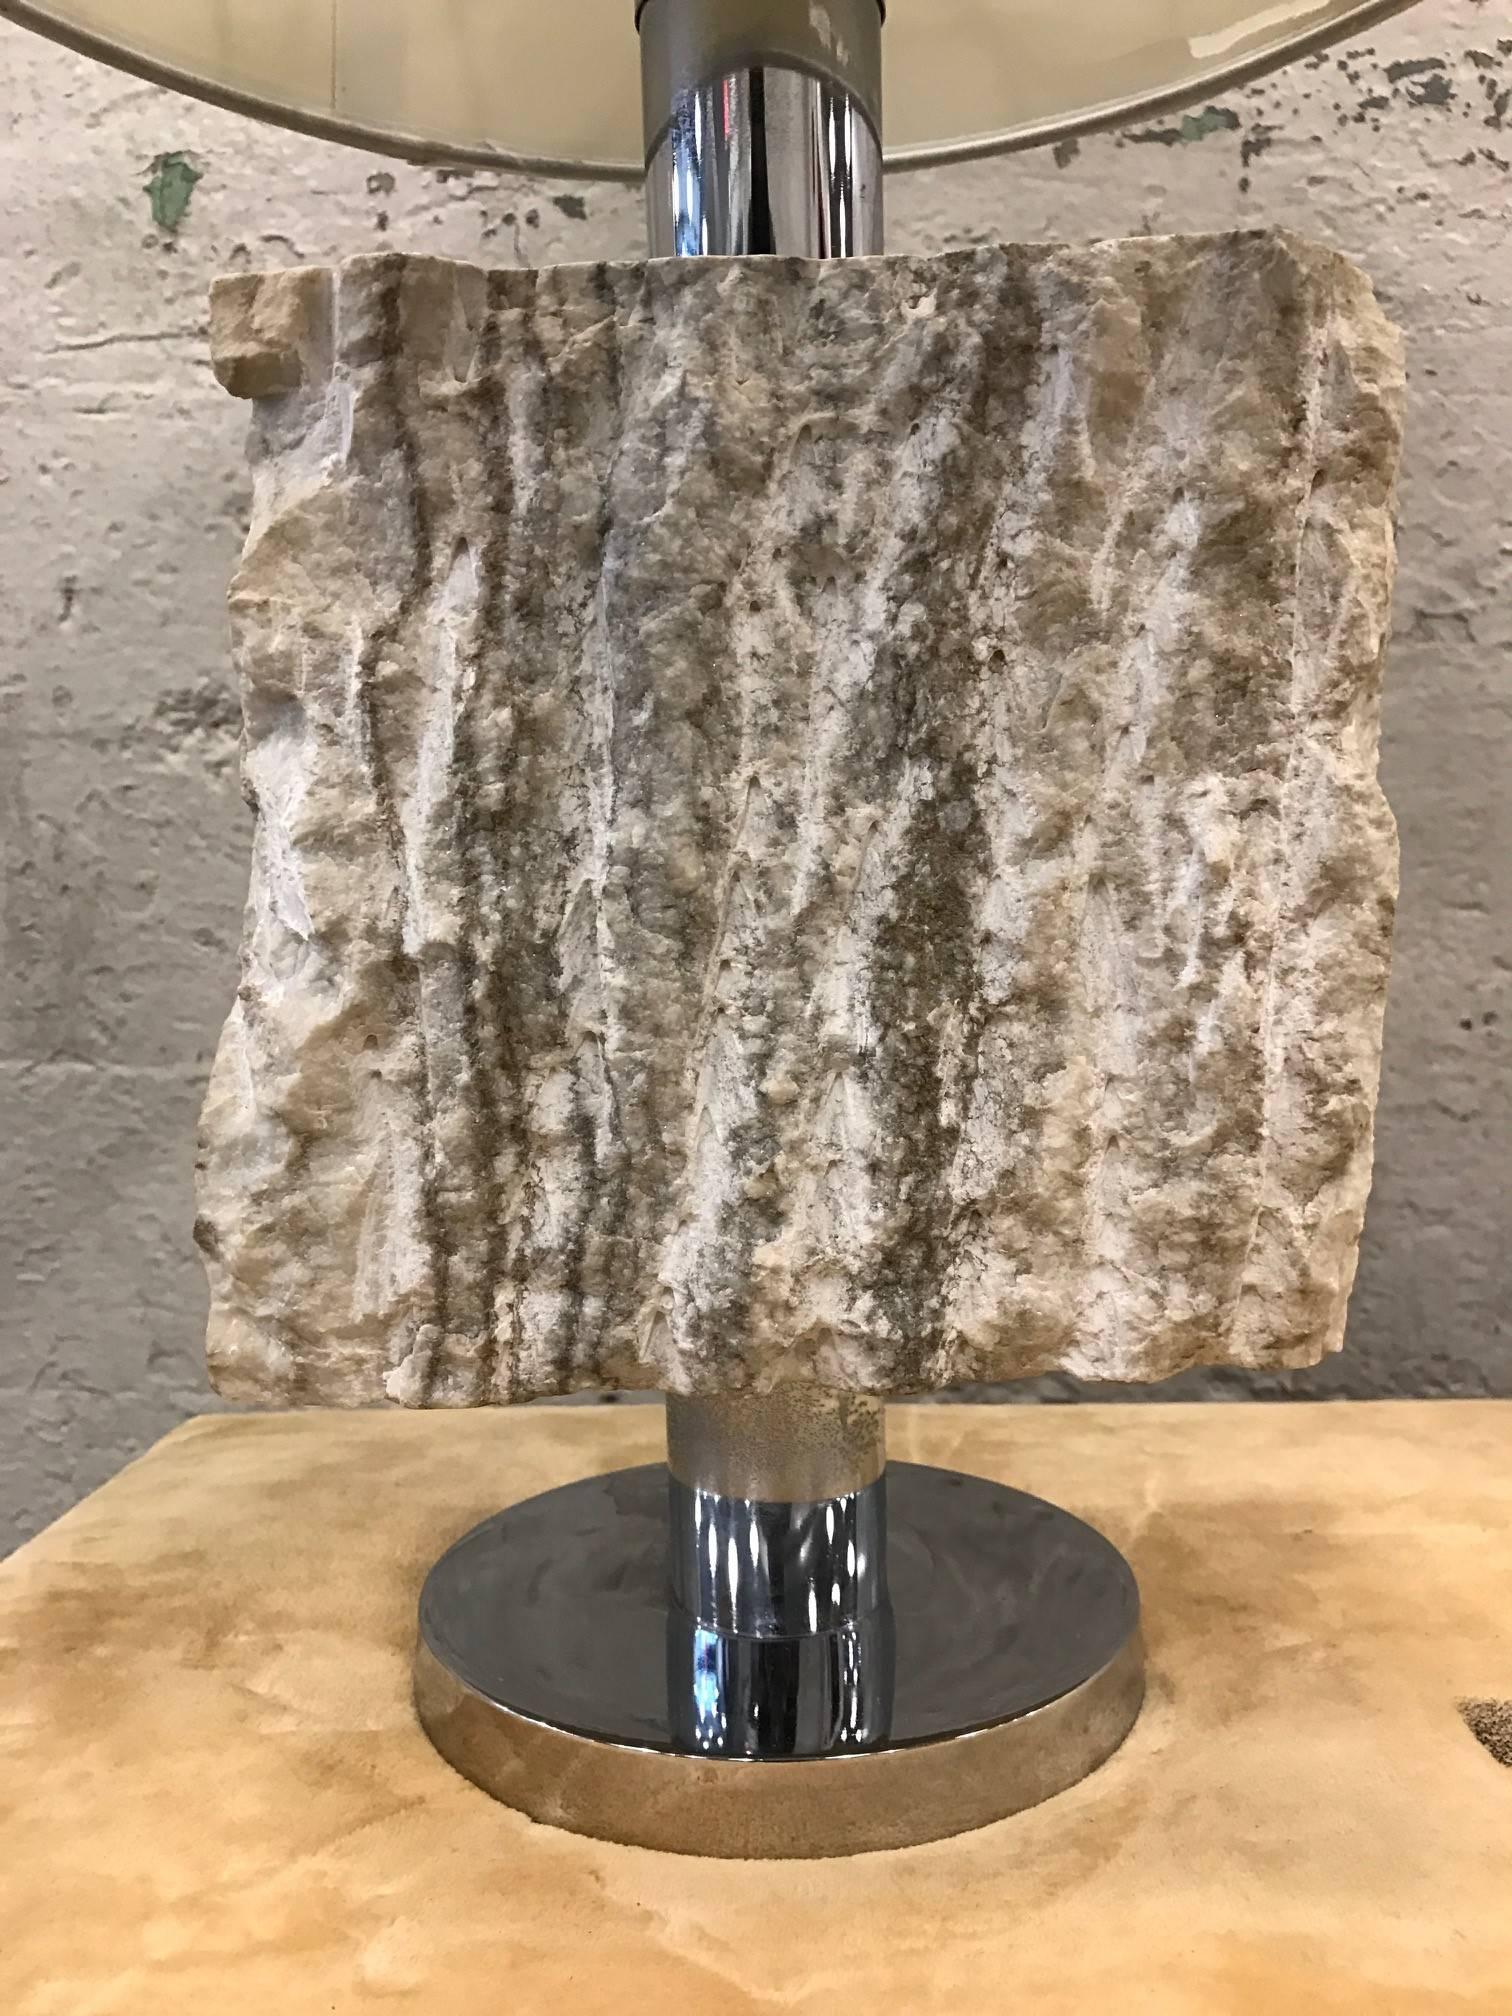 Organic solid marble lamp with chrome top and base. 
Shade not included.
Measures: 26 H (to top of finial) 14.5 (under socket) base: 6 in diameter. 